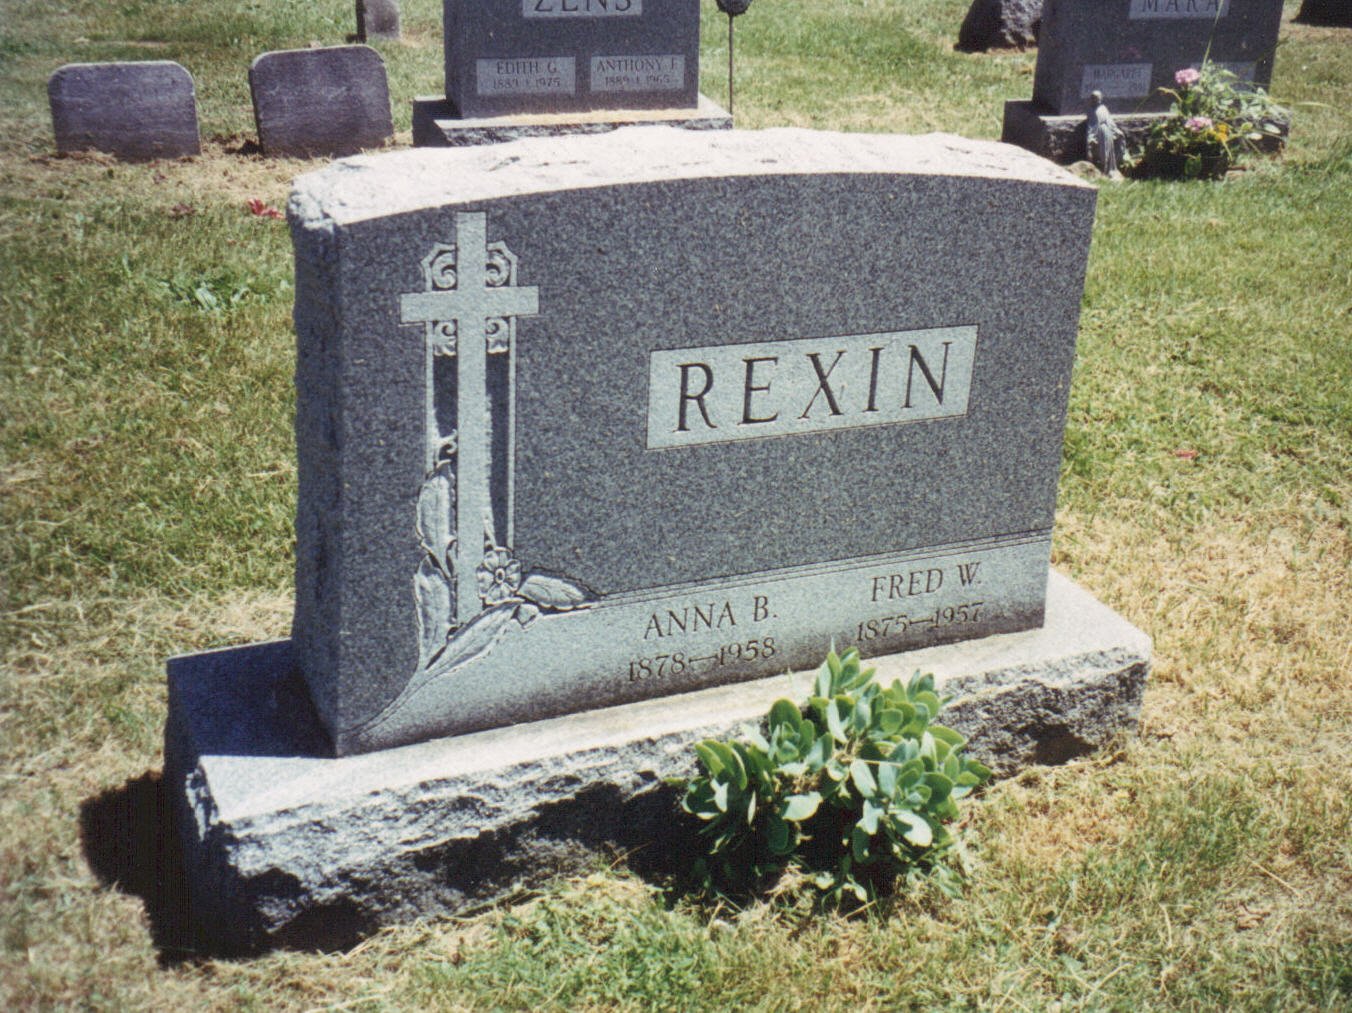 Anna B. and Fred W. Rexin marker